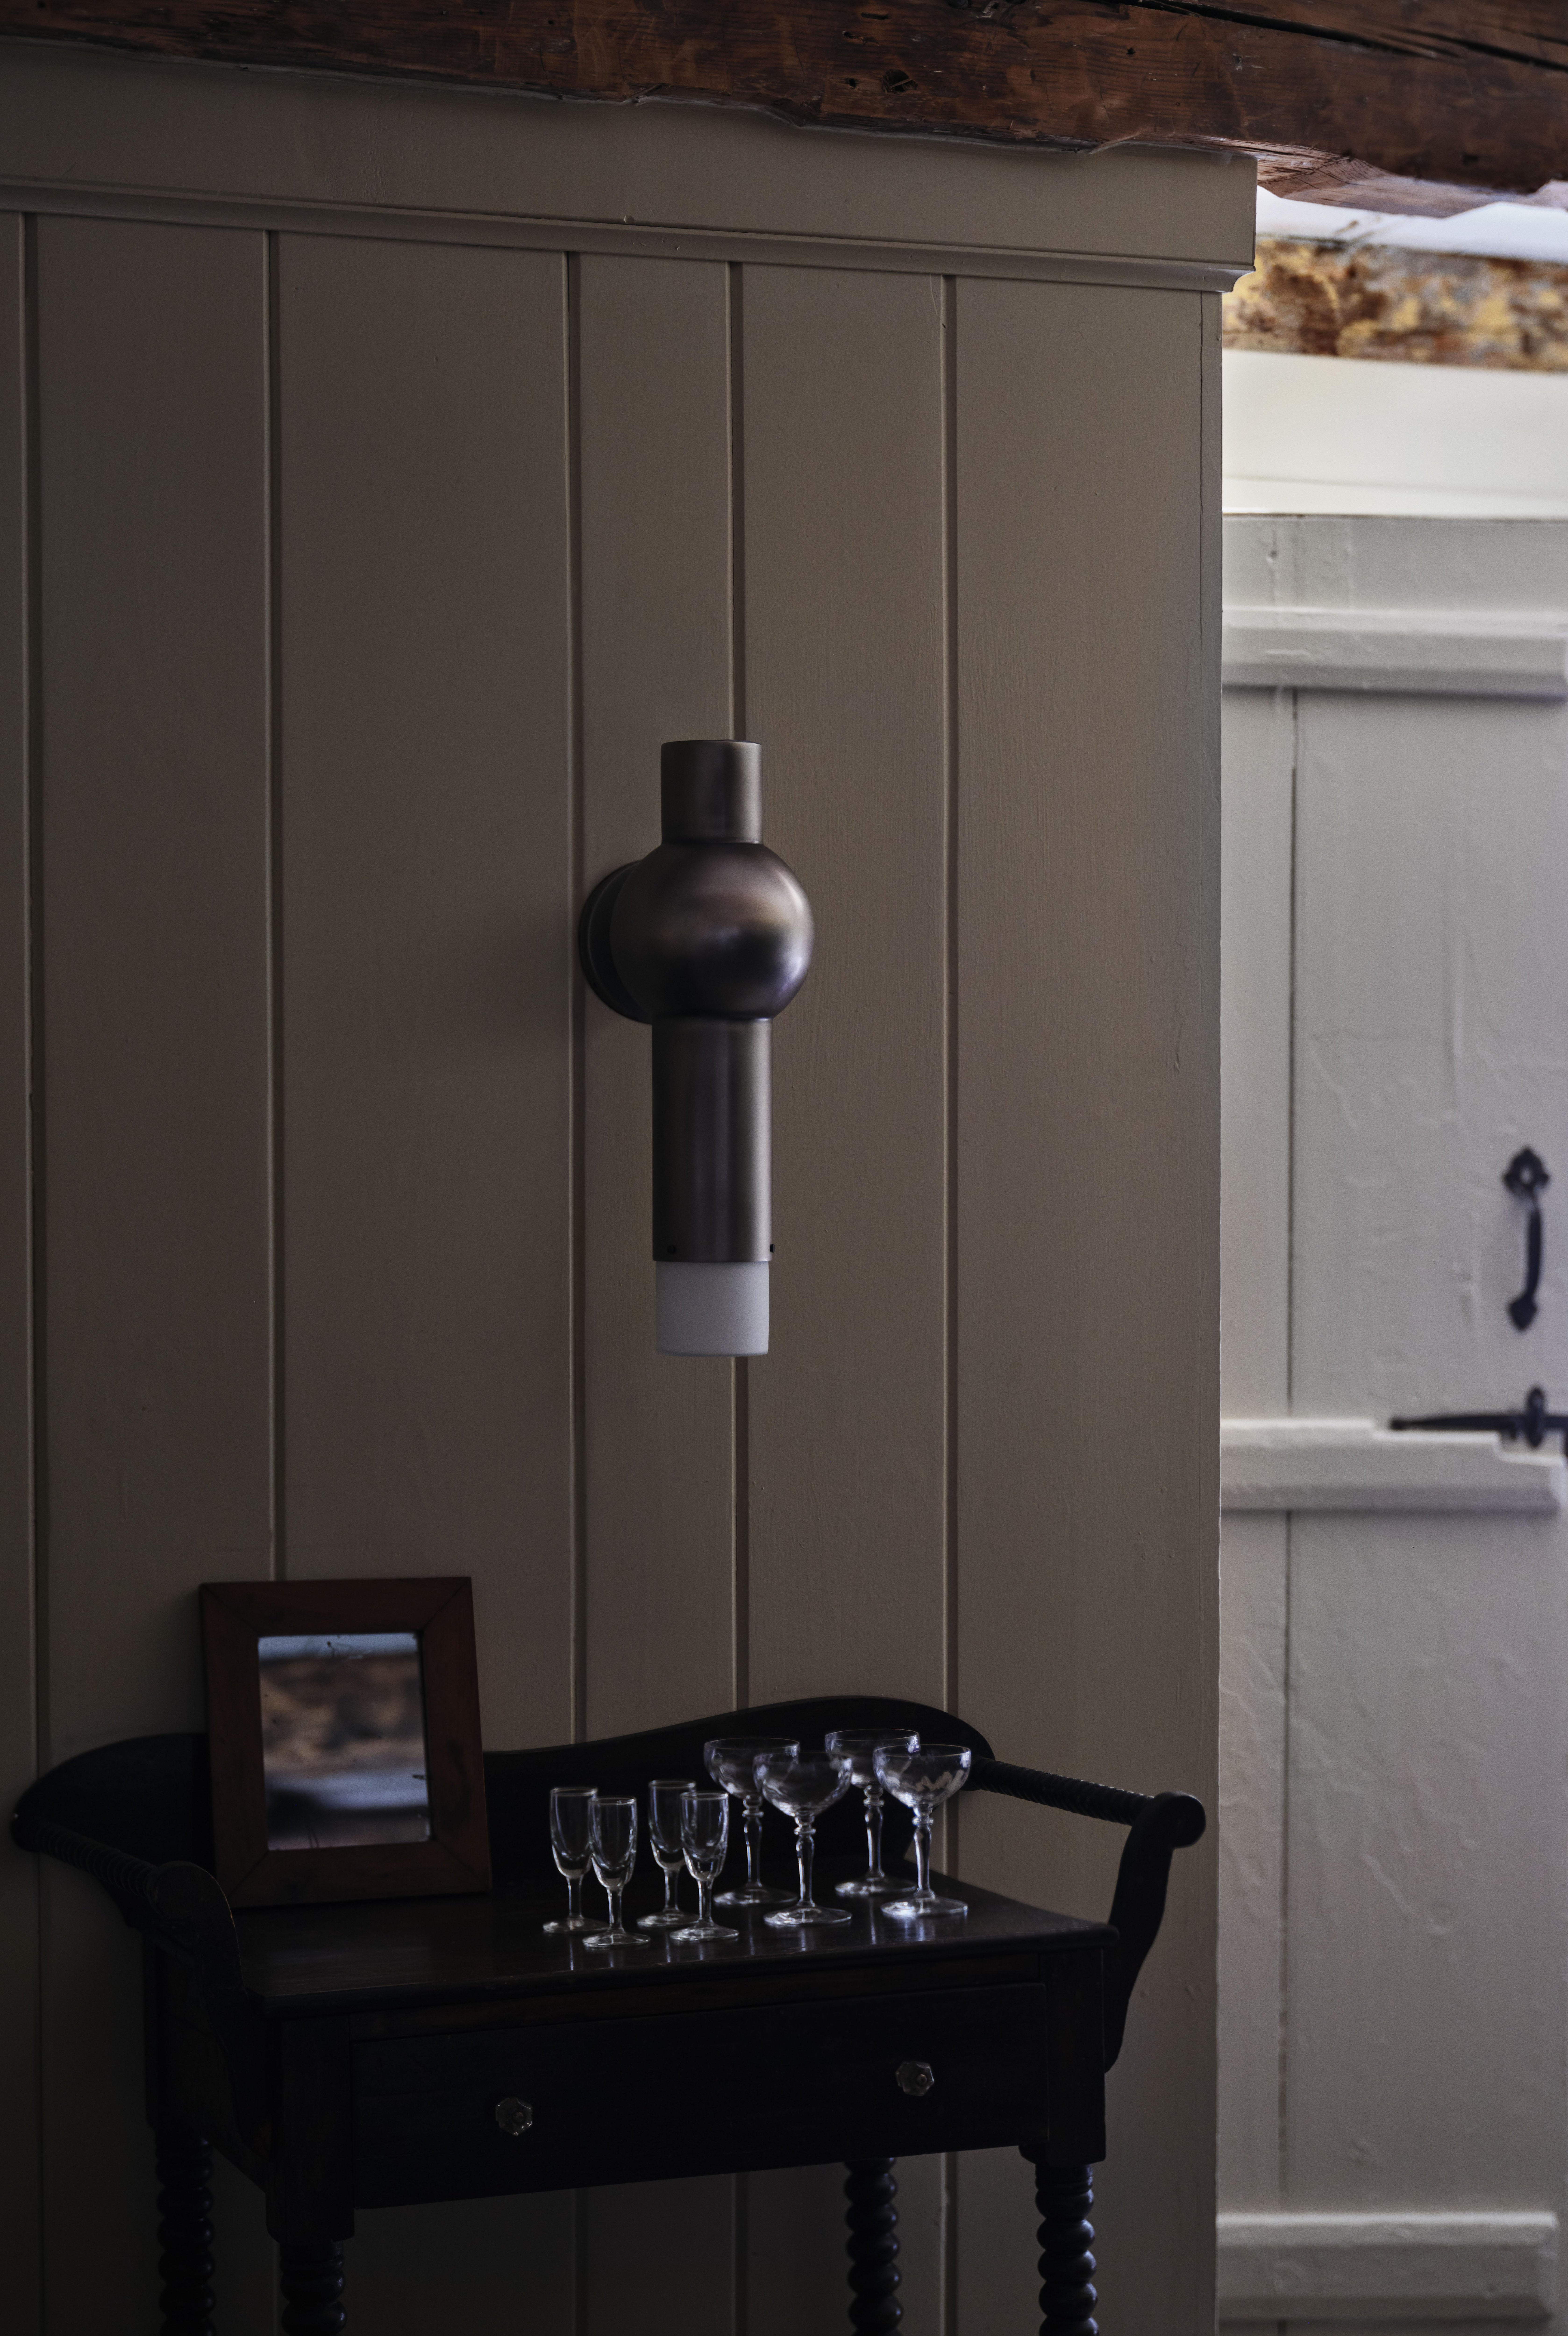 The Lantern sconce presents a finely balanced form with a hand-finished antique brass patina accompanied by a frosted glass diffuser. The Lantern Sconce provides a warm glow and a unique moment of interest wherever it is placed.

Available in